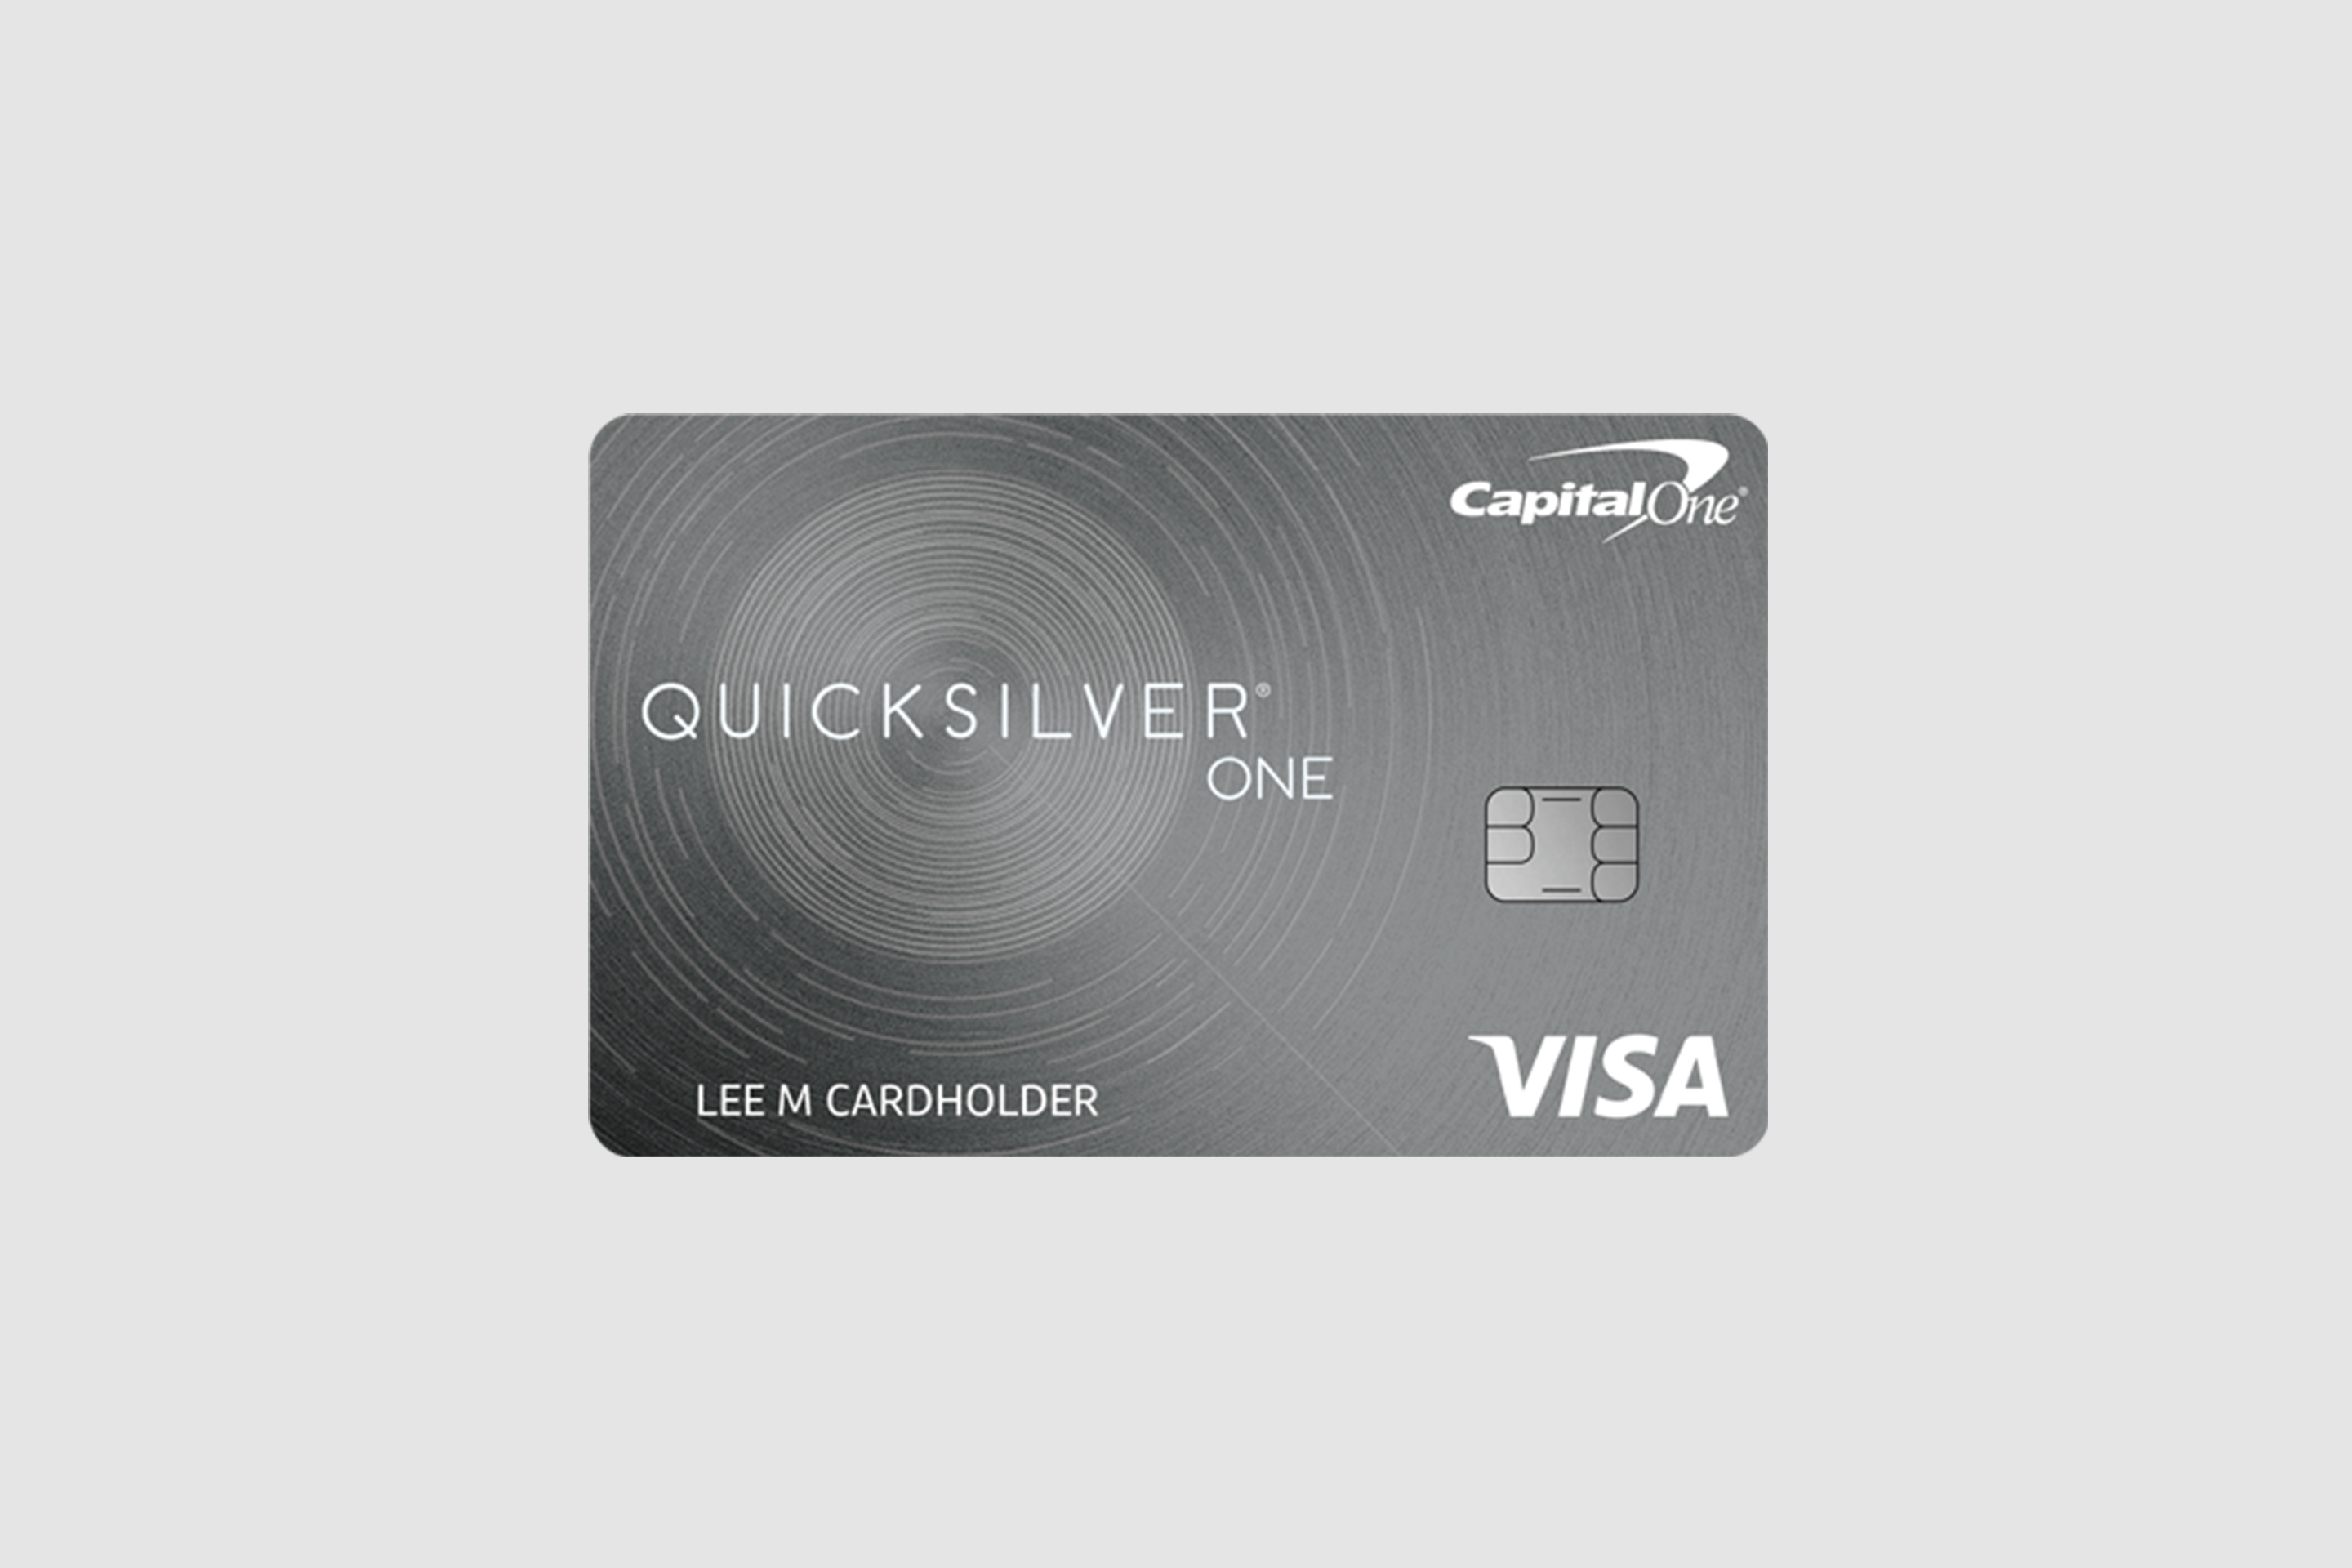 Quicksilver One Capital One Credit Card